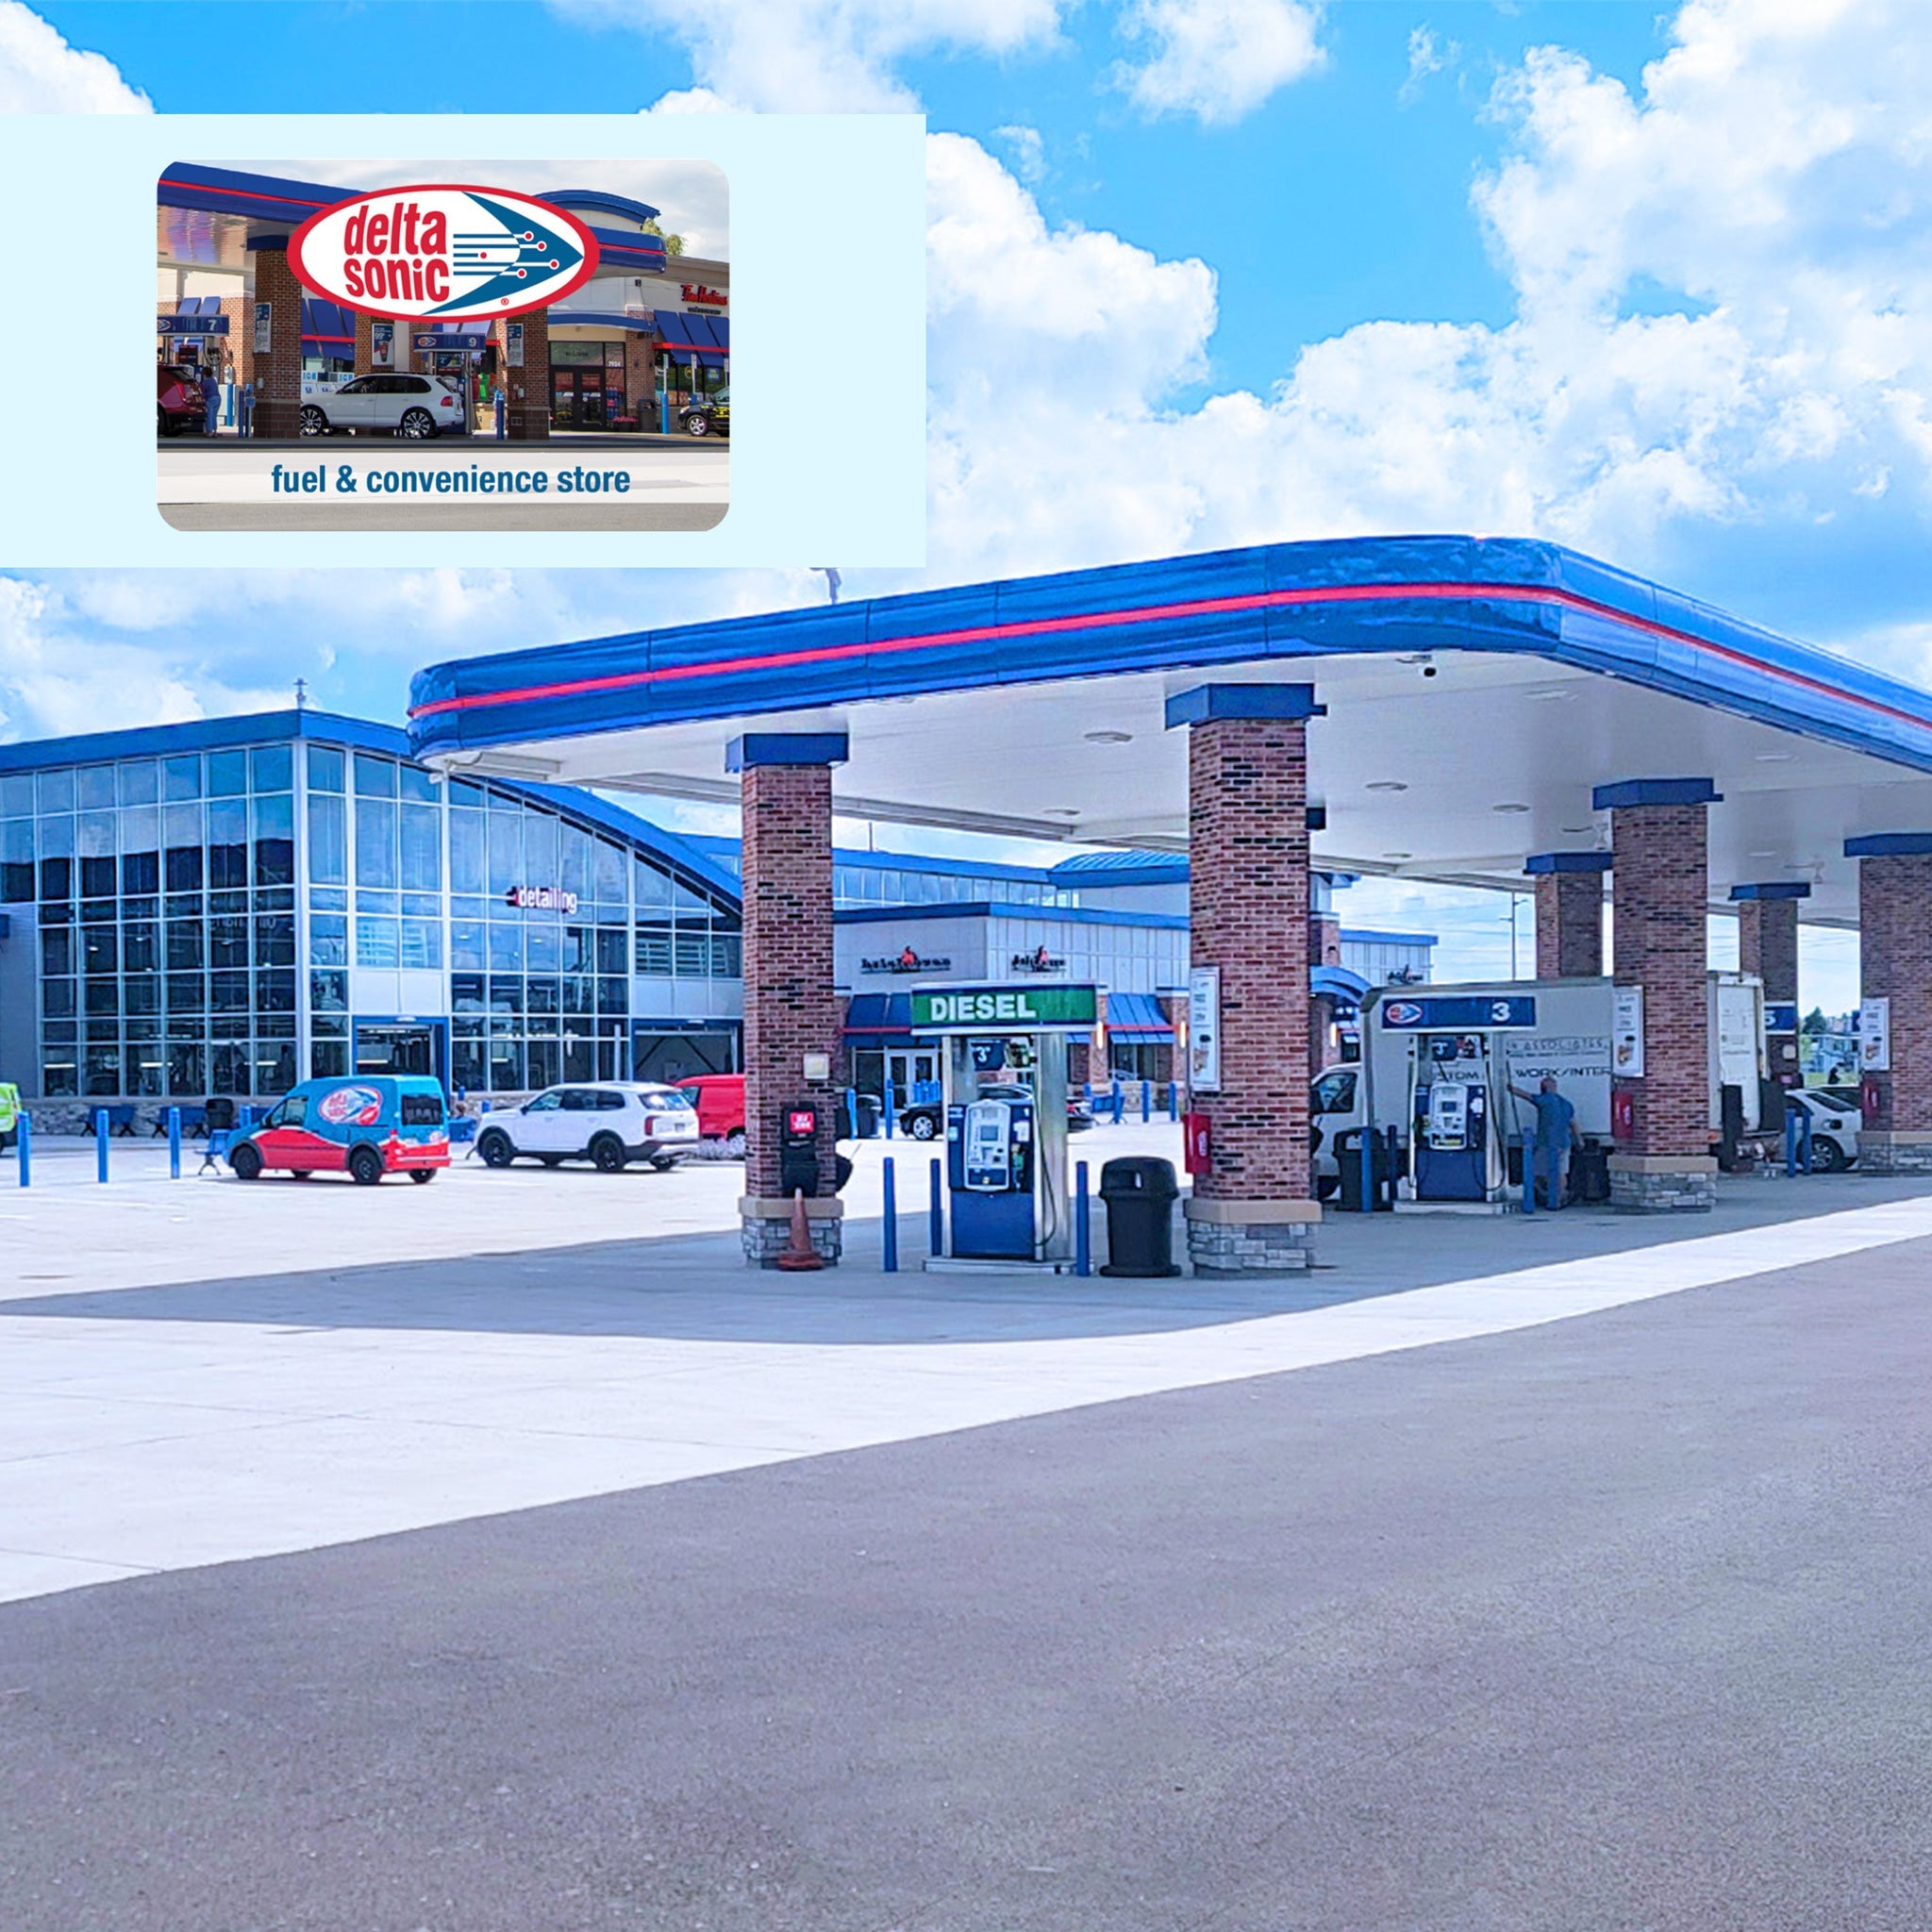 Delta Sonic fuel and convenience store gift card laid over image of Delta Sonic gas island